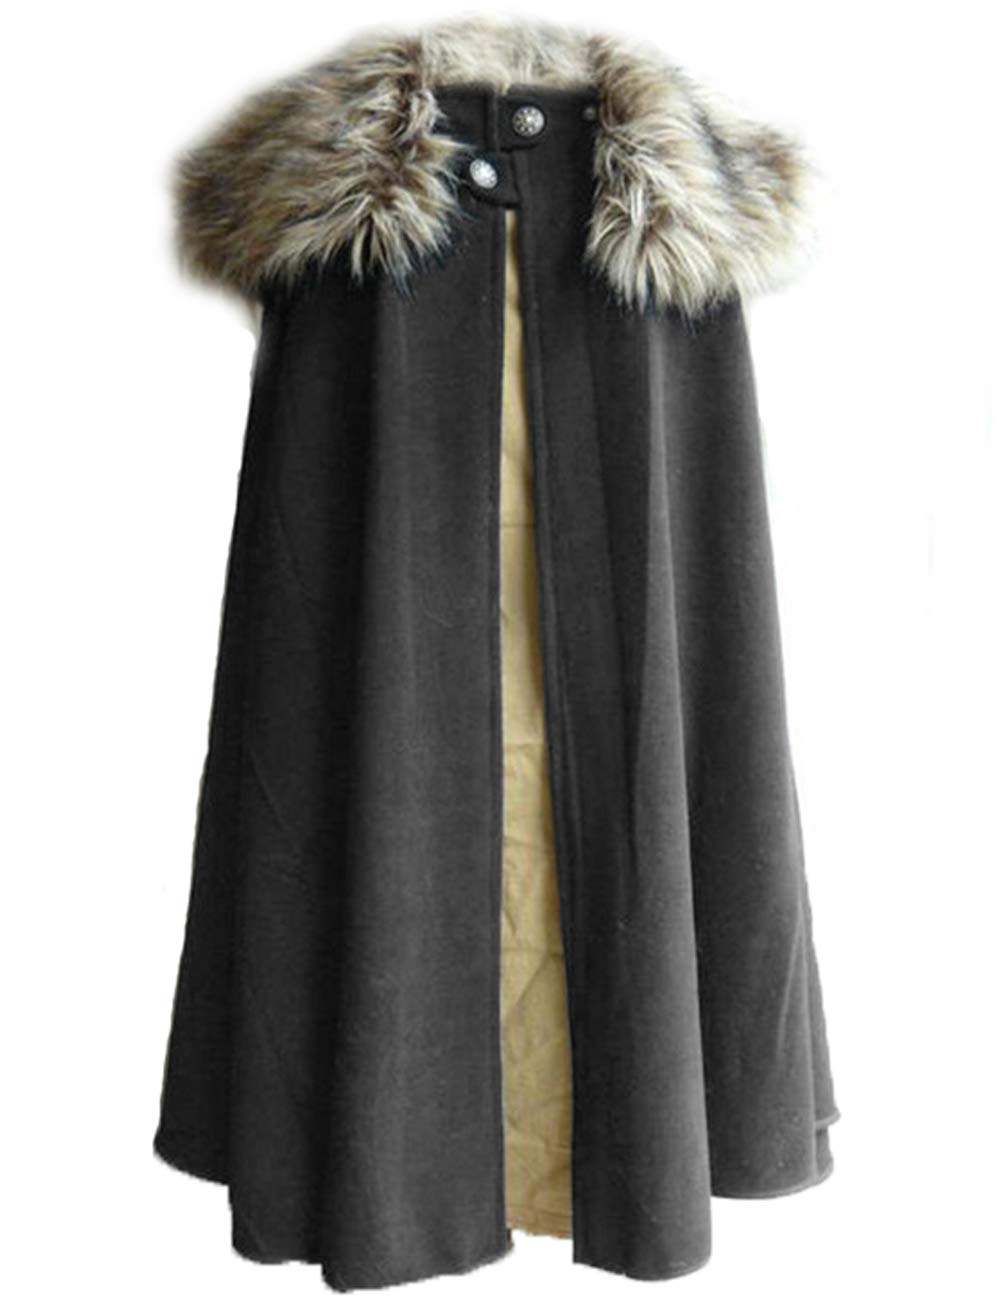 MSOrient Mens Medieval Viking Cloak Fur Cape Cosplay Costume Renaissance King With Fur Cloak Halloween Costume Small Brown